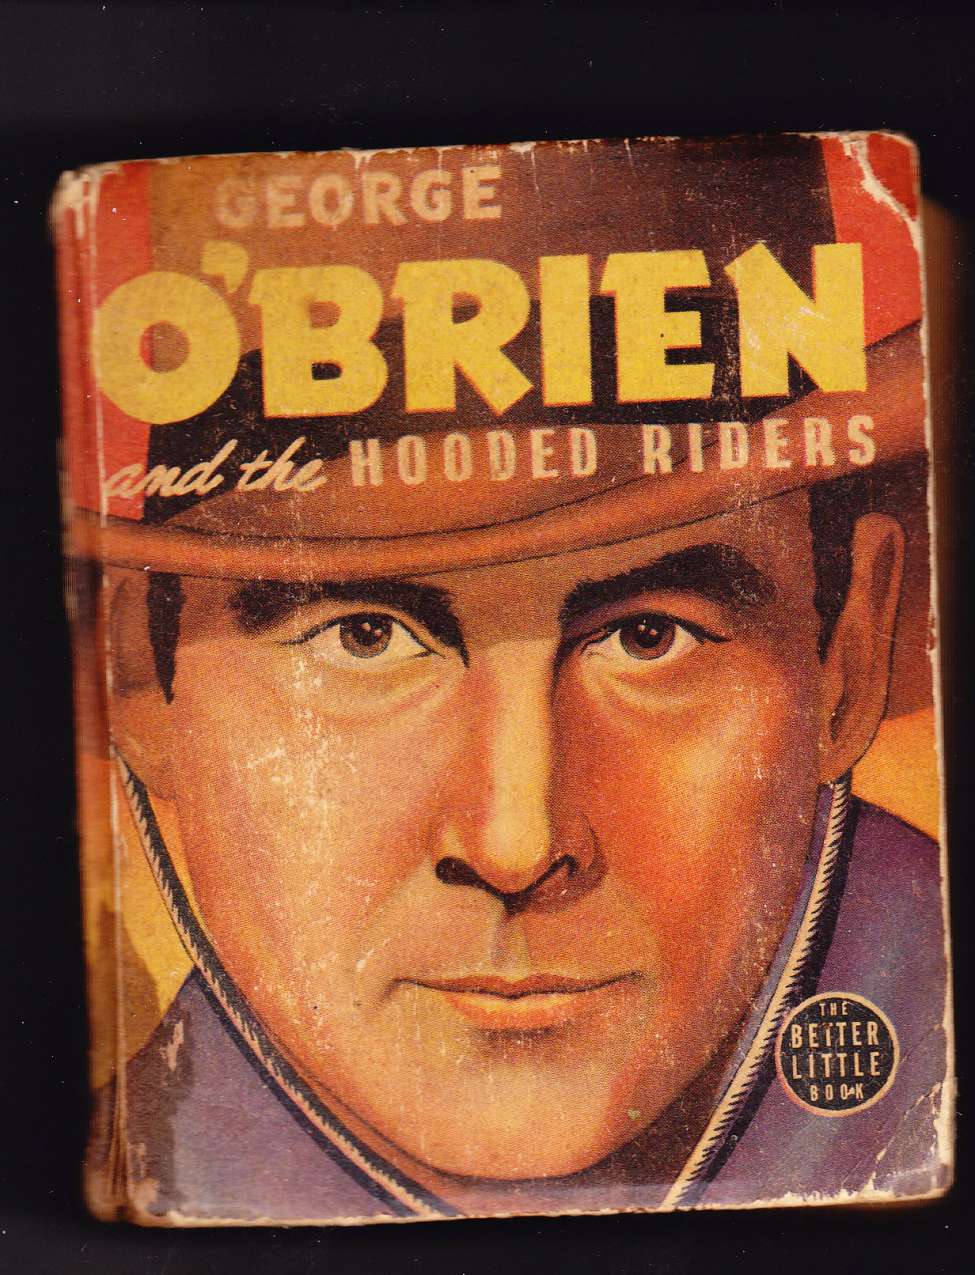 Book Cover For George O'Brien and the Hooded Riders